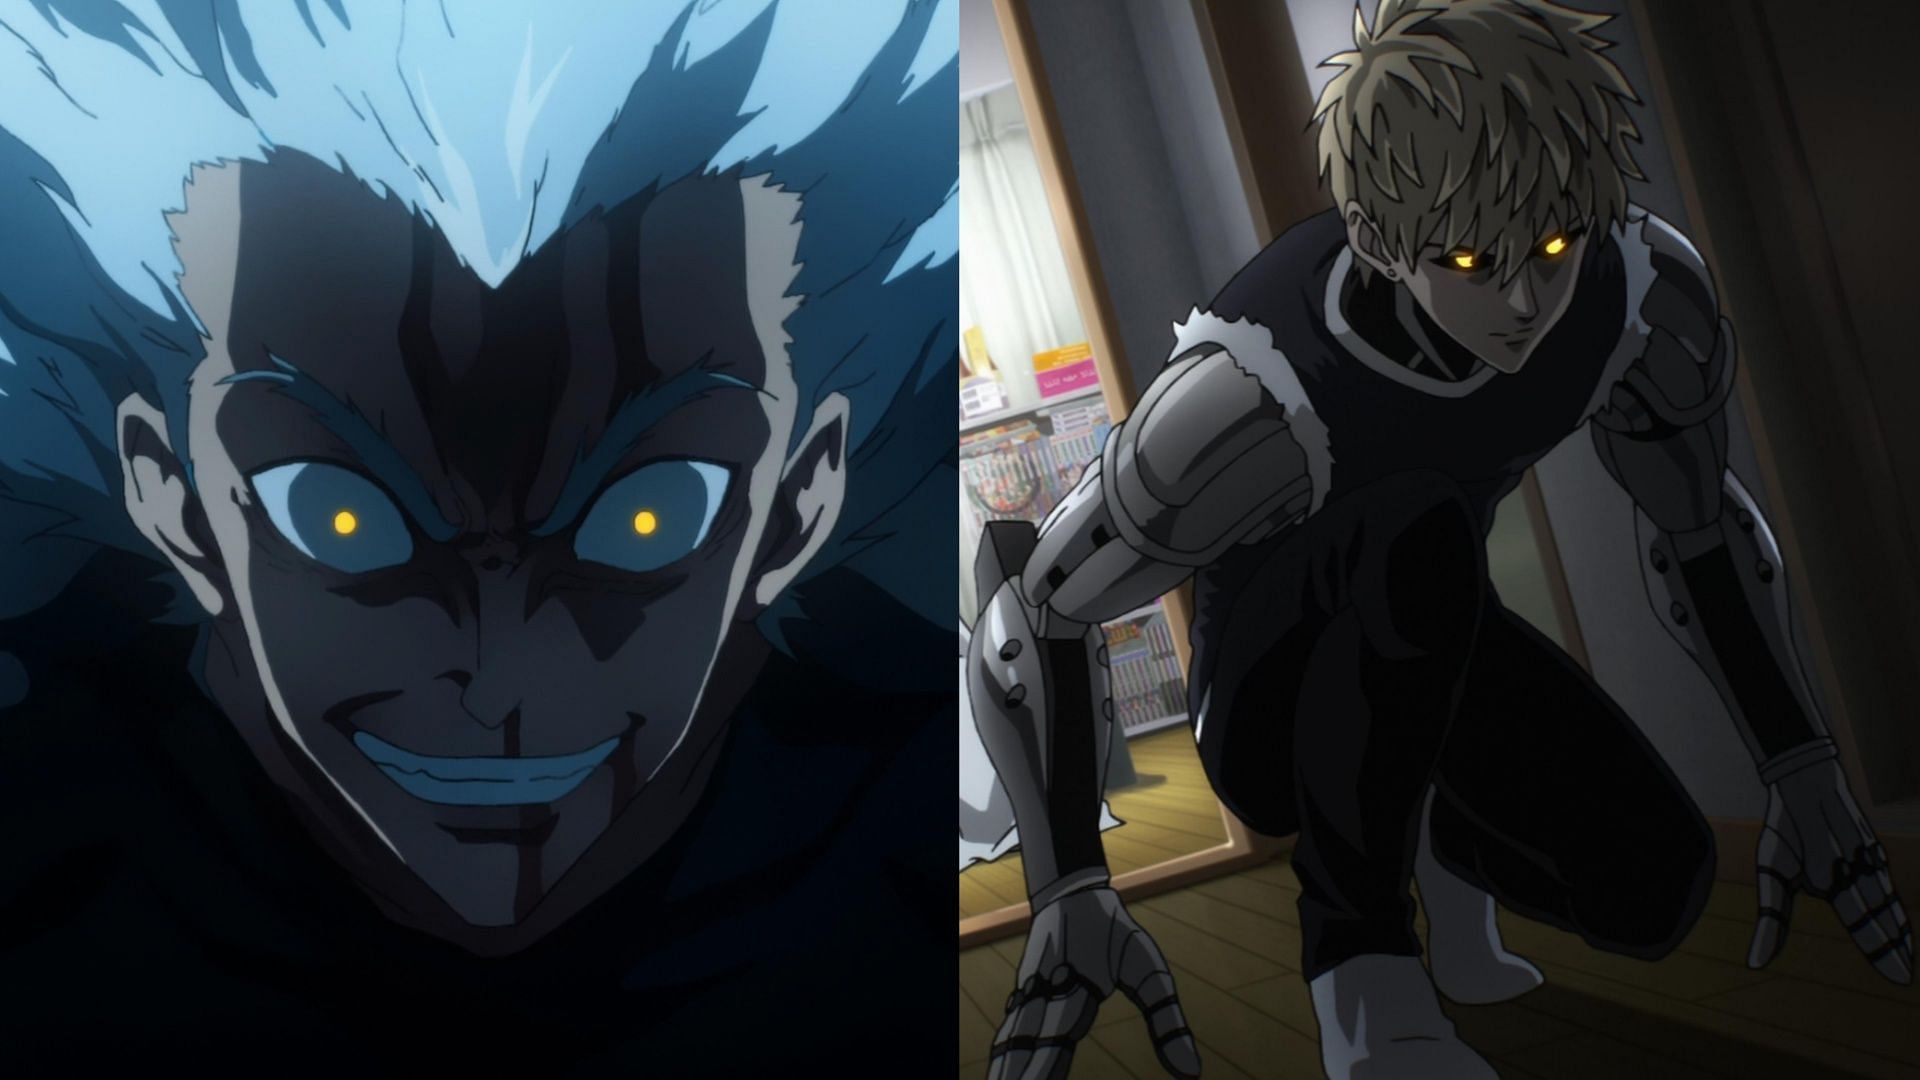 Will Genos surpass the Hero Hunter in the One Punch Man series? (Image via J.C. Staff)